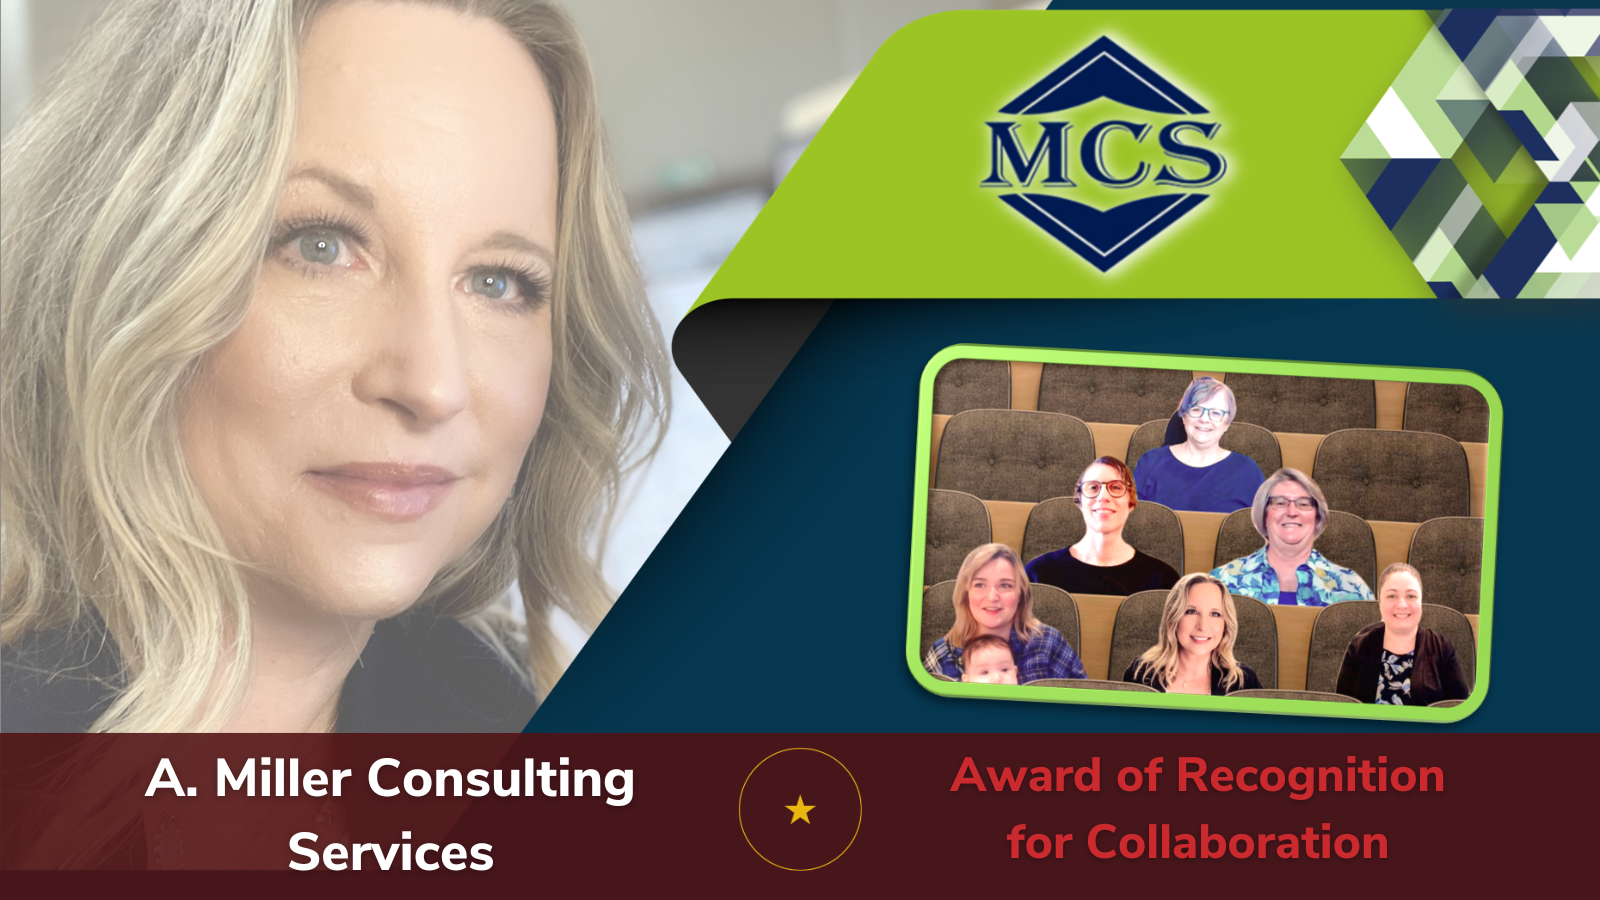 A. Miller Consulting Services team poses for a photo on Microsoft Teams